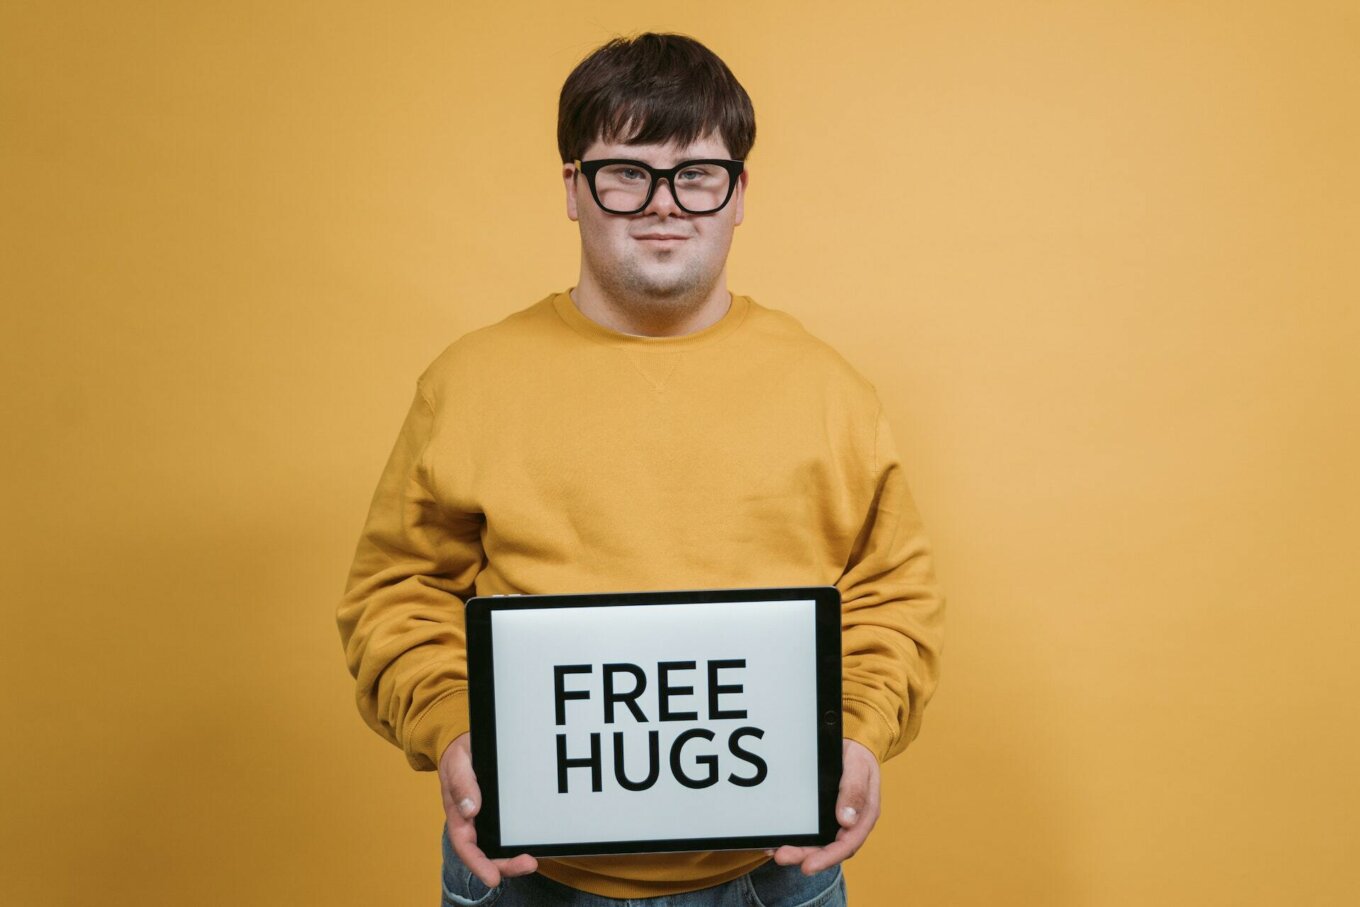 A man in a yellow jumper holds up a sign that says FREE HUGS